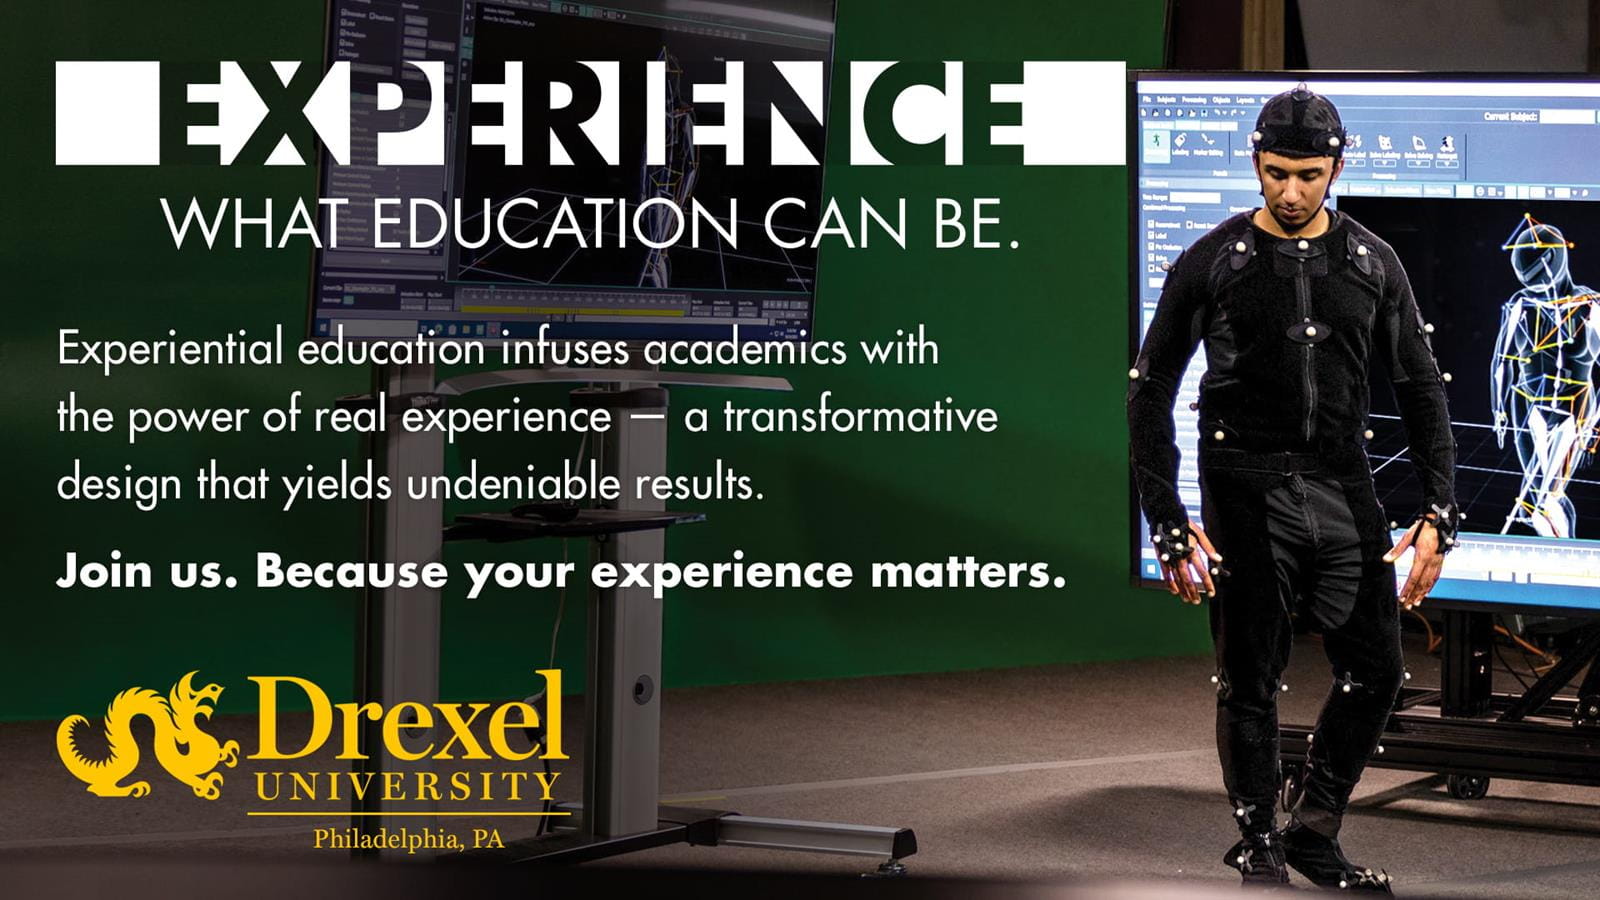 Experience Drexel motion capture display ad